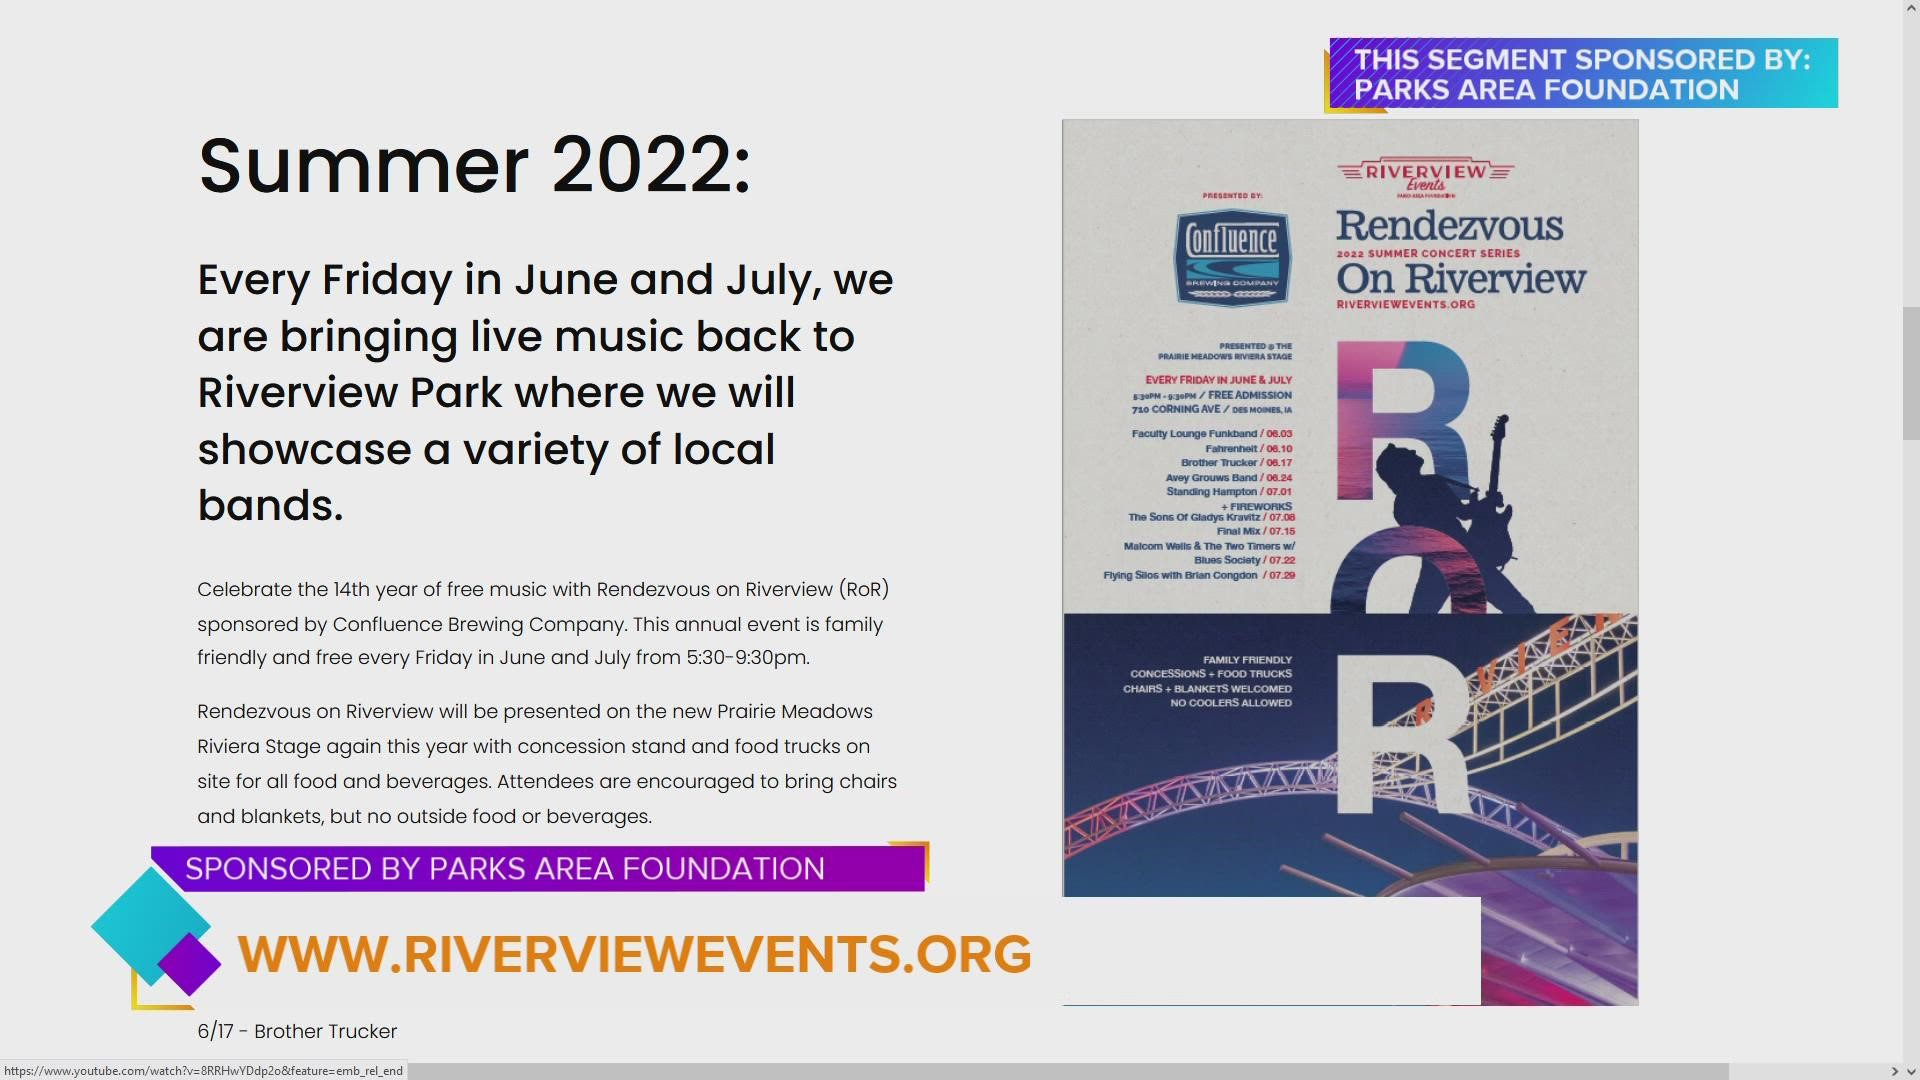 Local 5 is proud to be part of Rendezvous on Riverview Concert Series in 2022! This FREE, Family friendly event every Friday night at Riverview Park in June & July